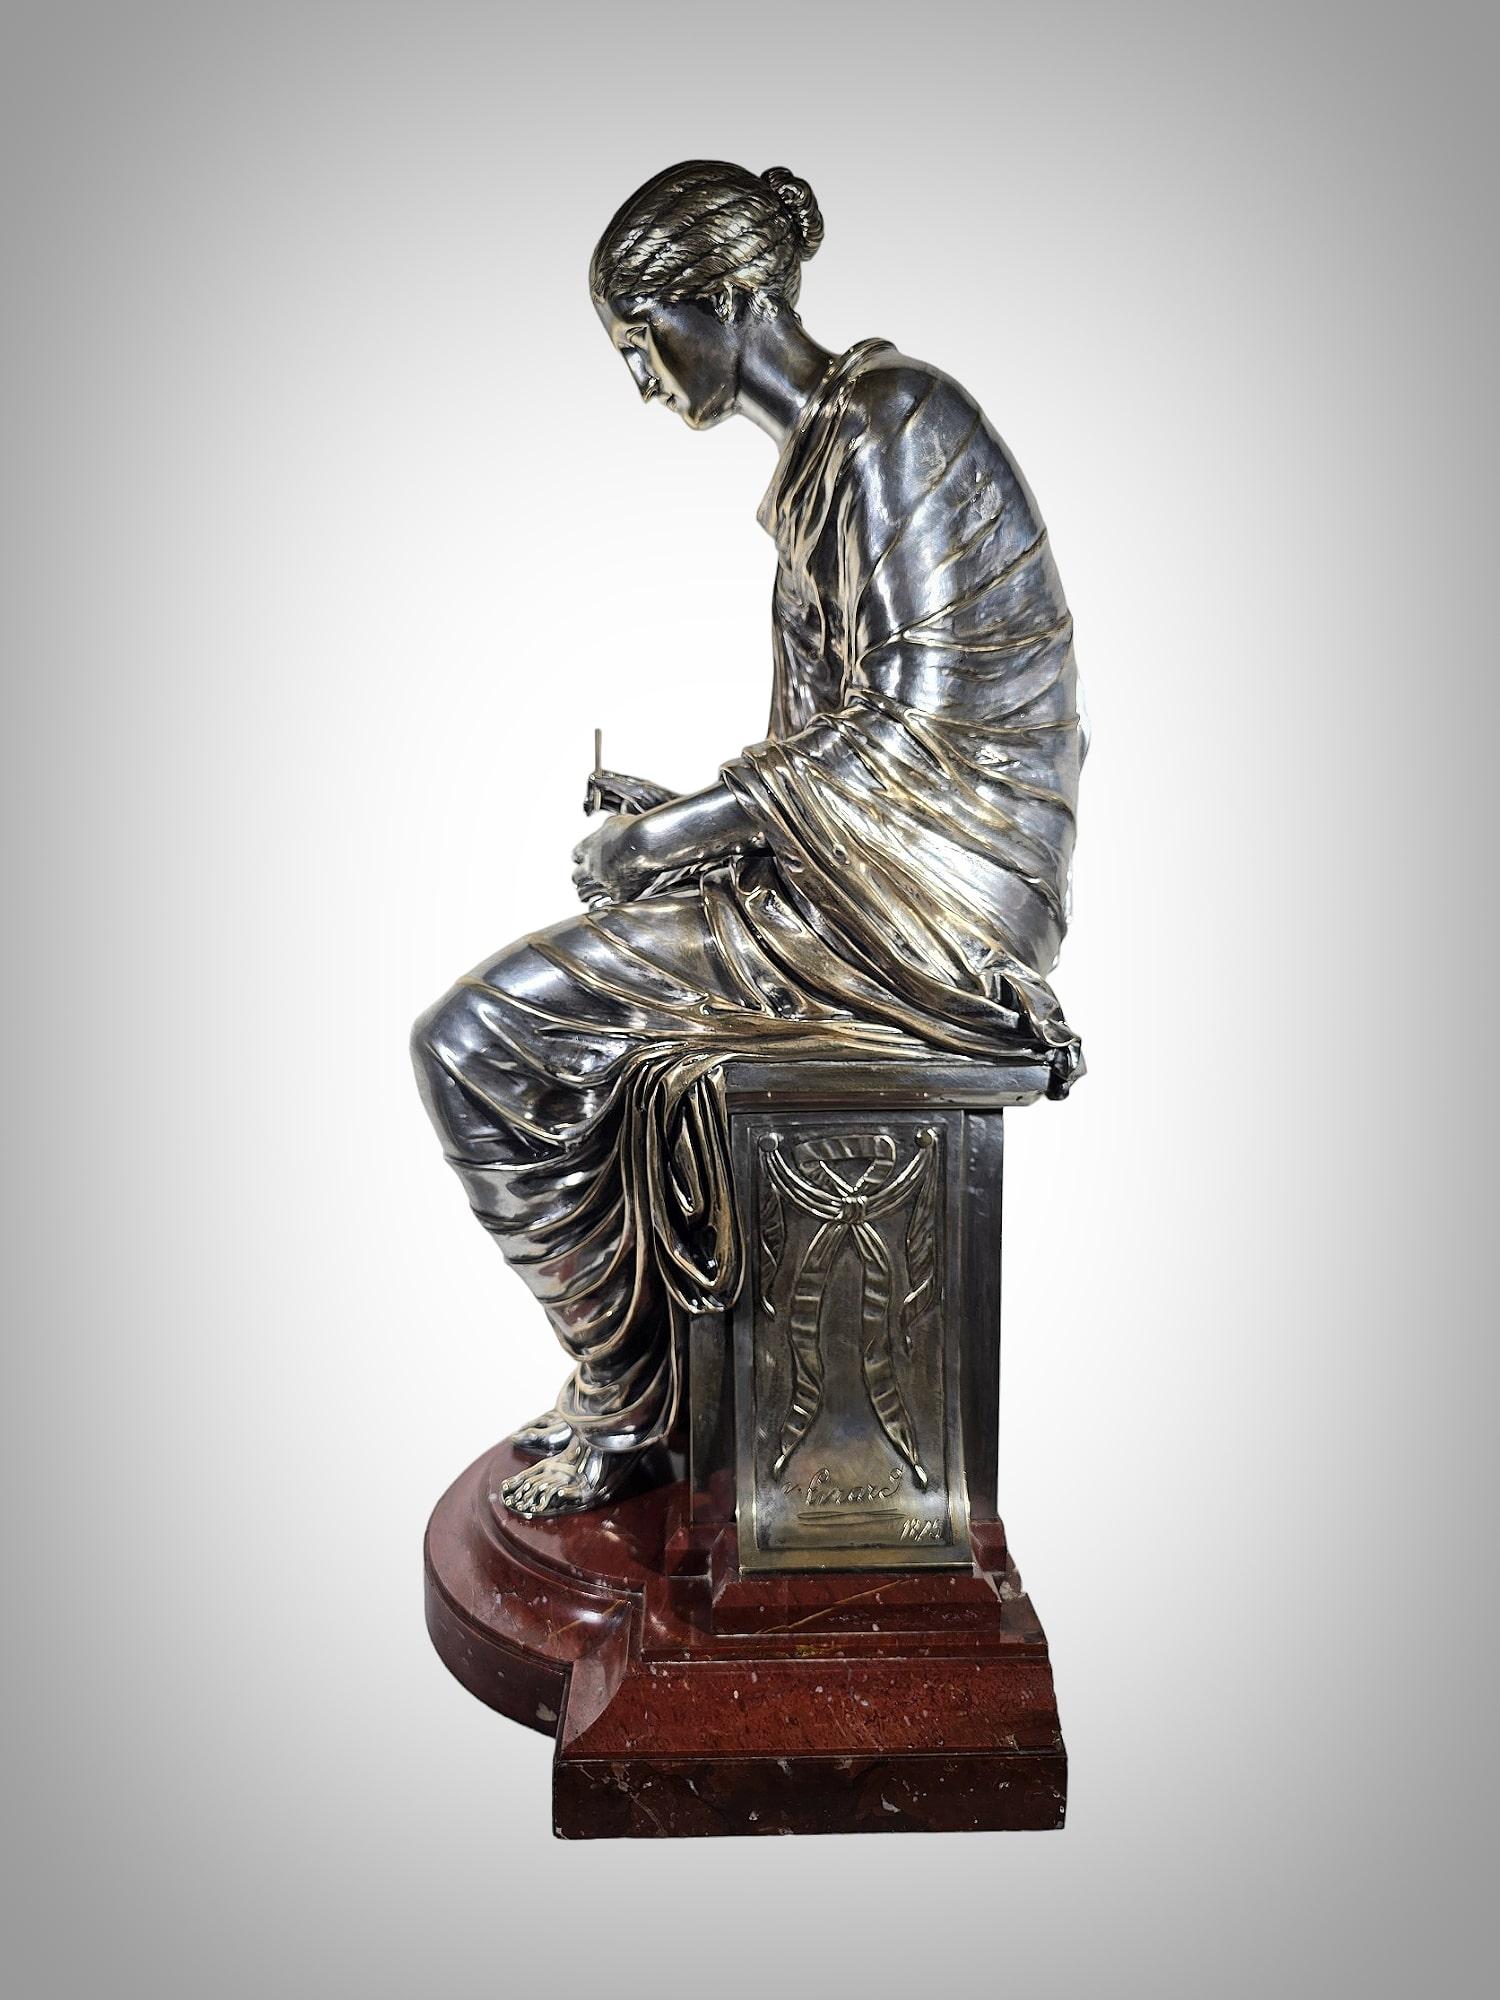 Behold this magnificent bronze sculpture depicting a possibly Greek lady seated, delicately holding a pencil. Crafted with exquisite detail, the sculpture boasts a silver finish that adds to its allure. What sets this piece apart is not only its